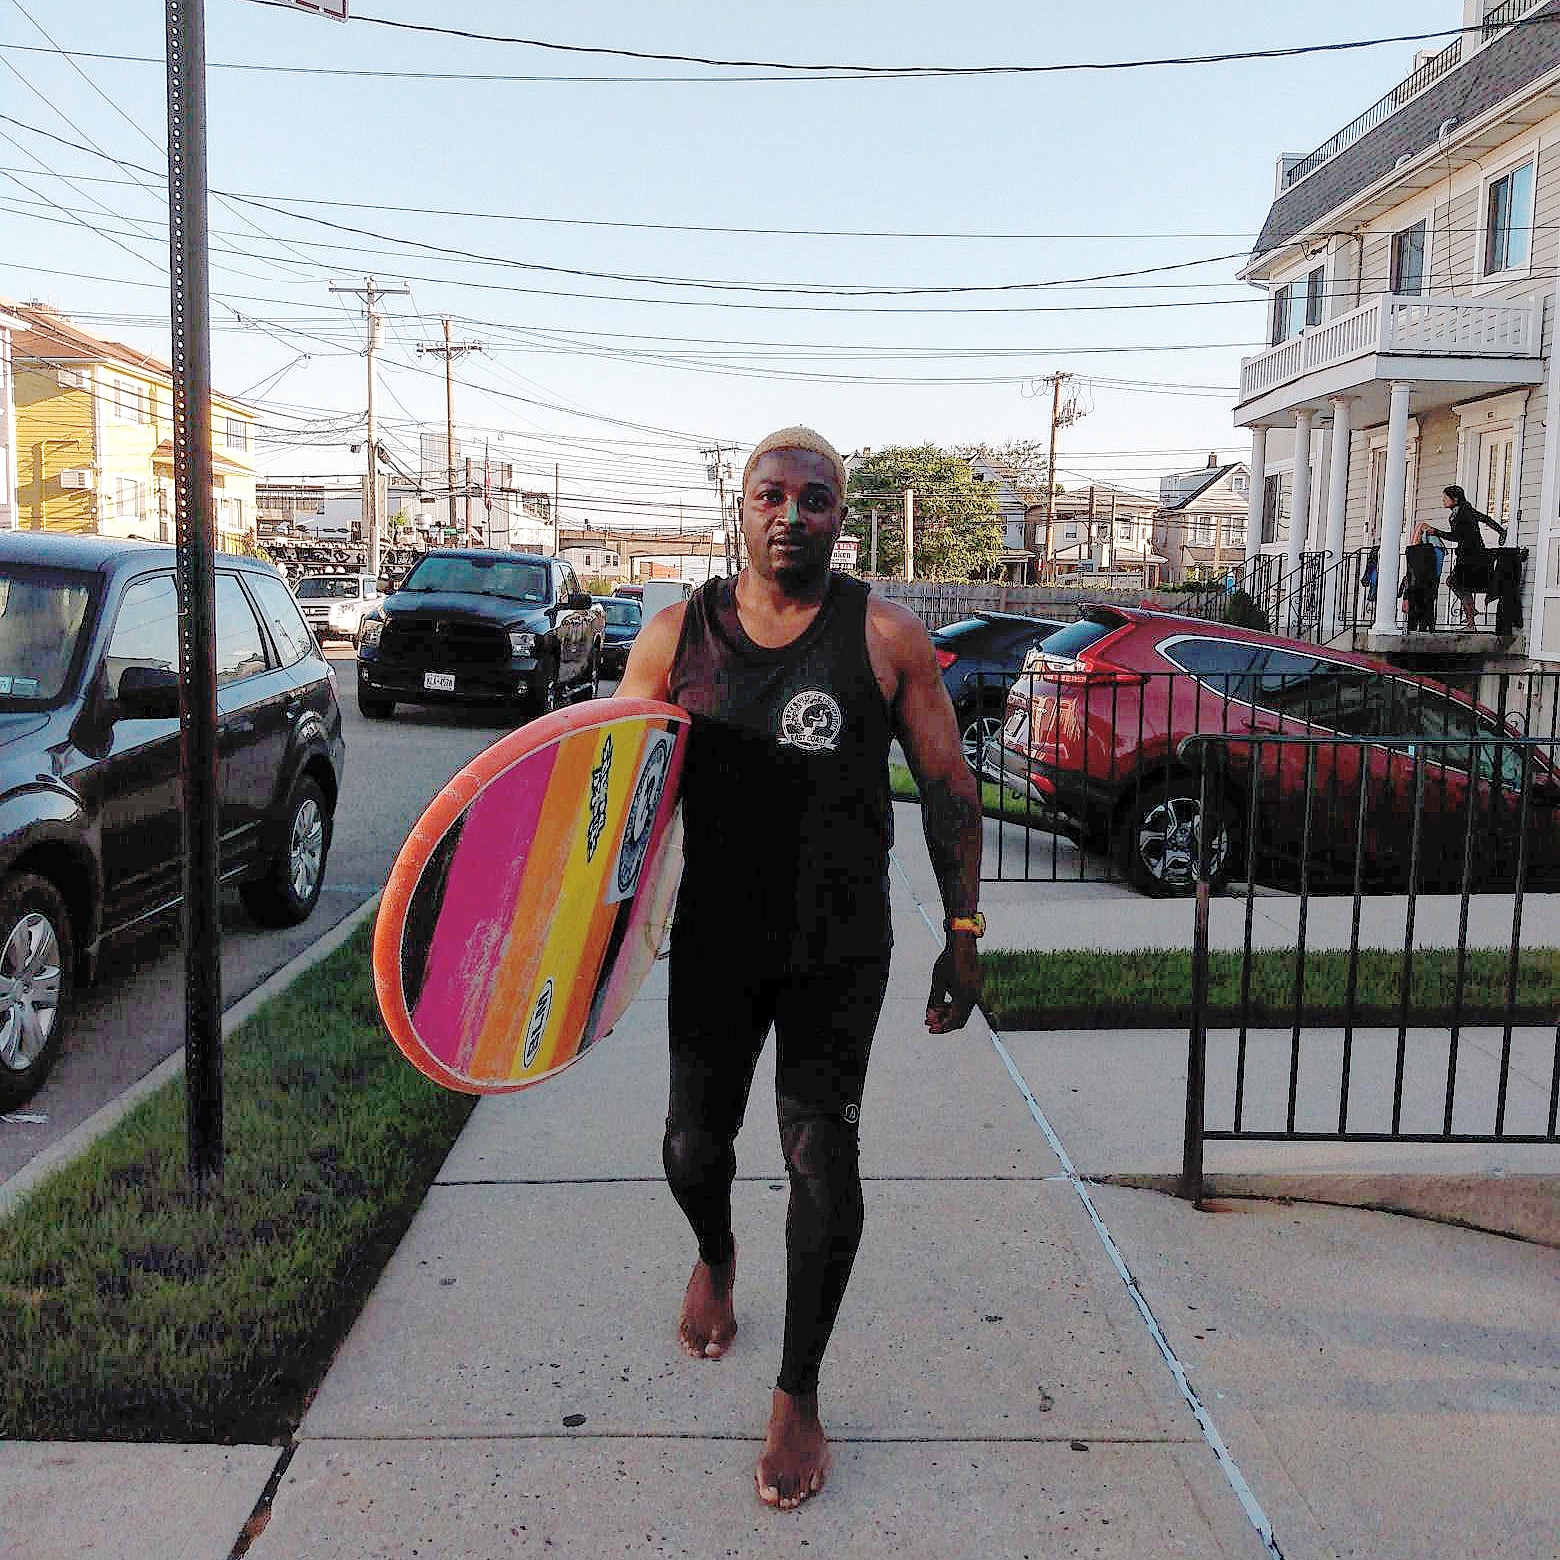 PHOTO: Lou Harris, the founder of the East Coast chapter of the Black Surfing Association, is pictured in an undated handout photo. Harris provides free surfing lessons to youths in New York's Rockaways.